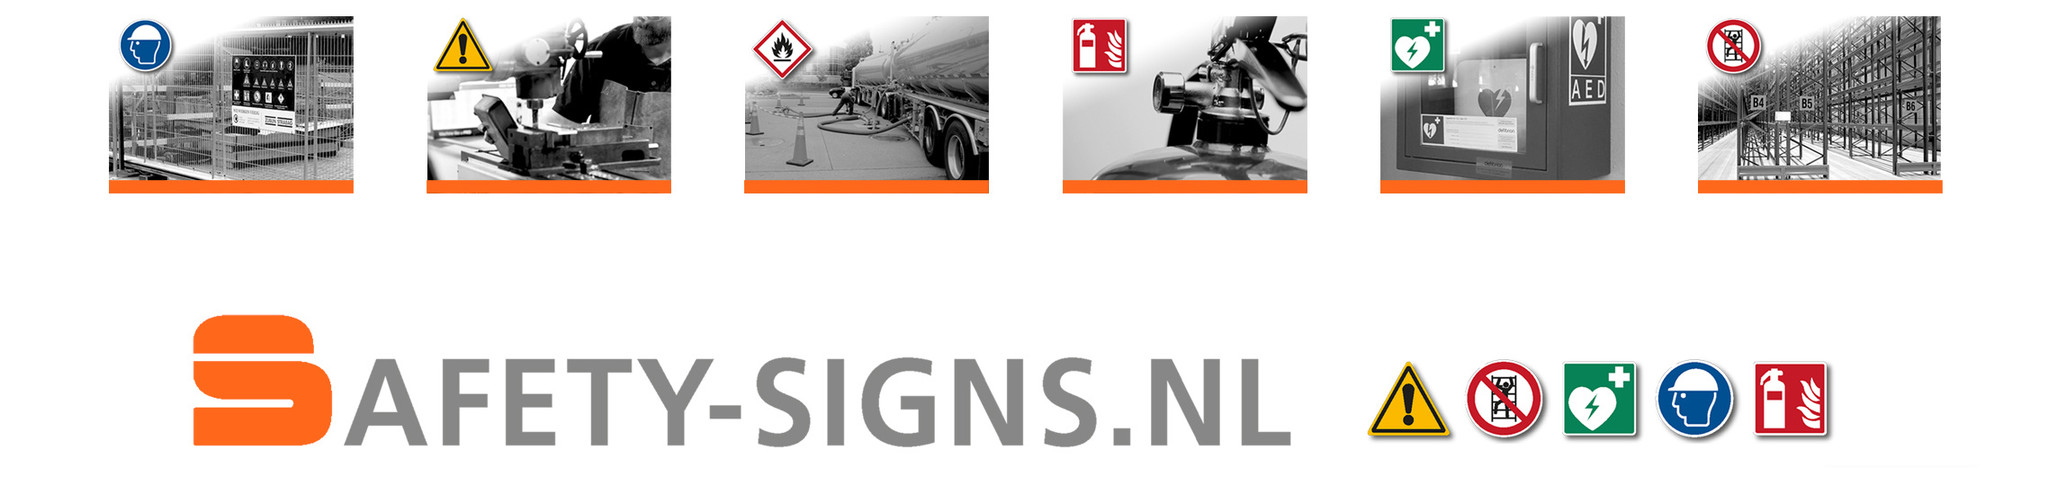 safety-sign.nl